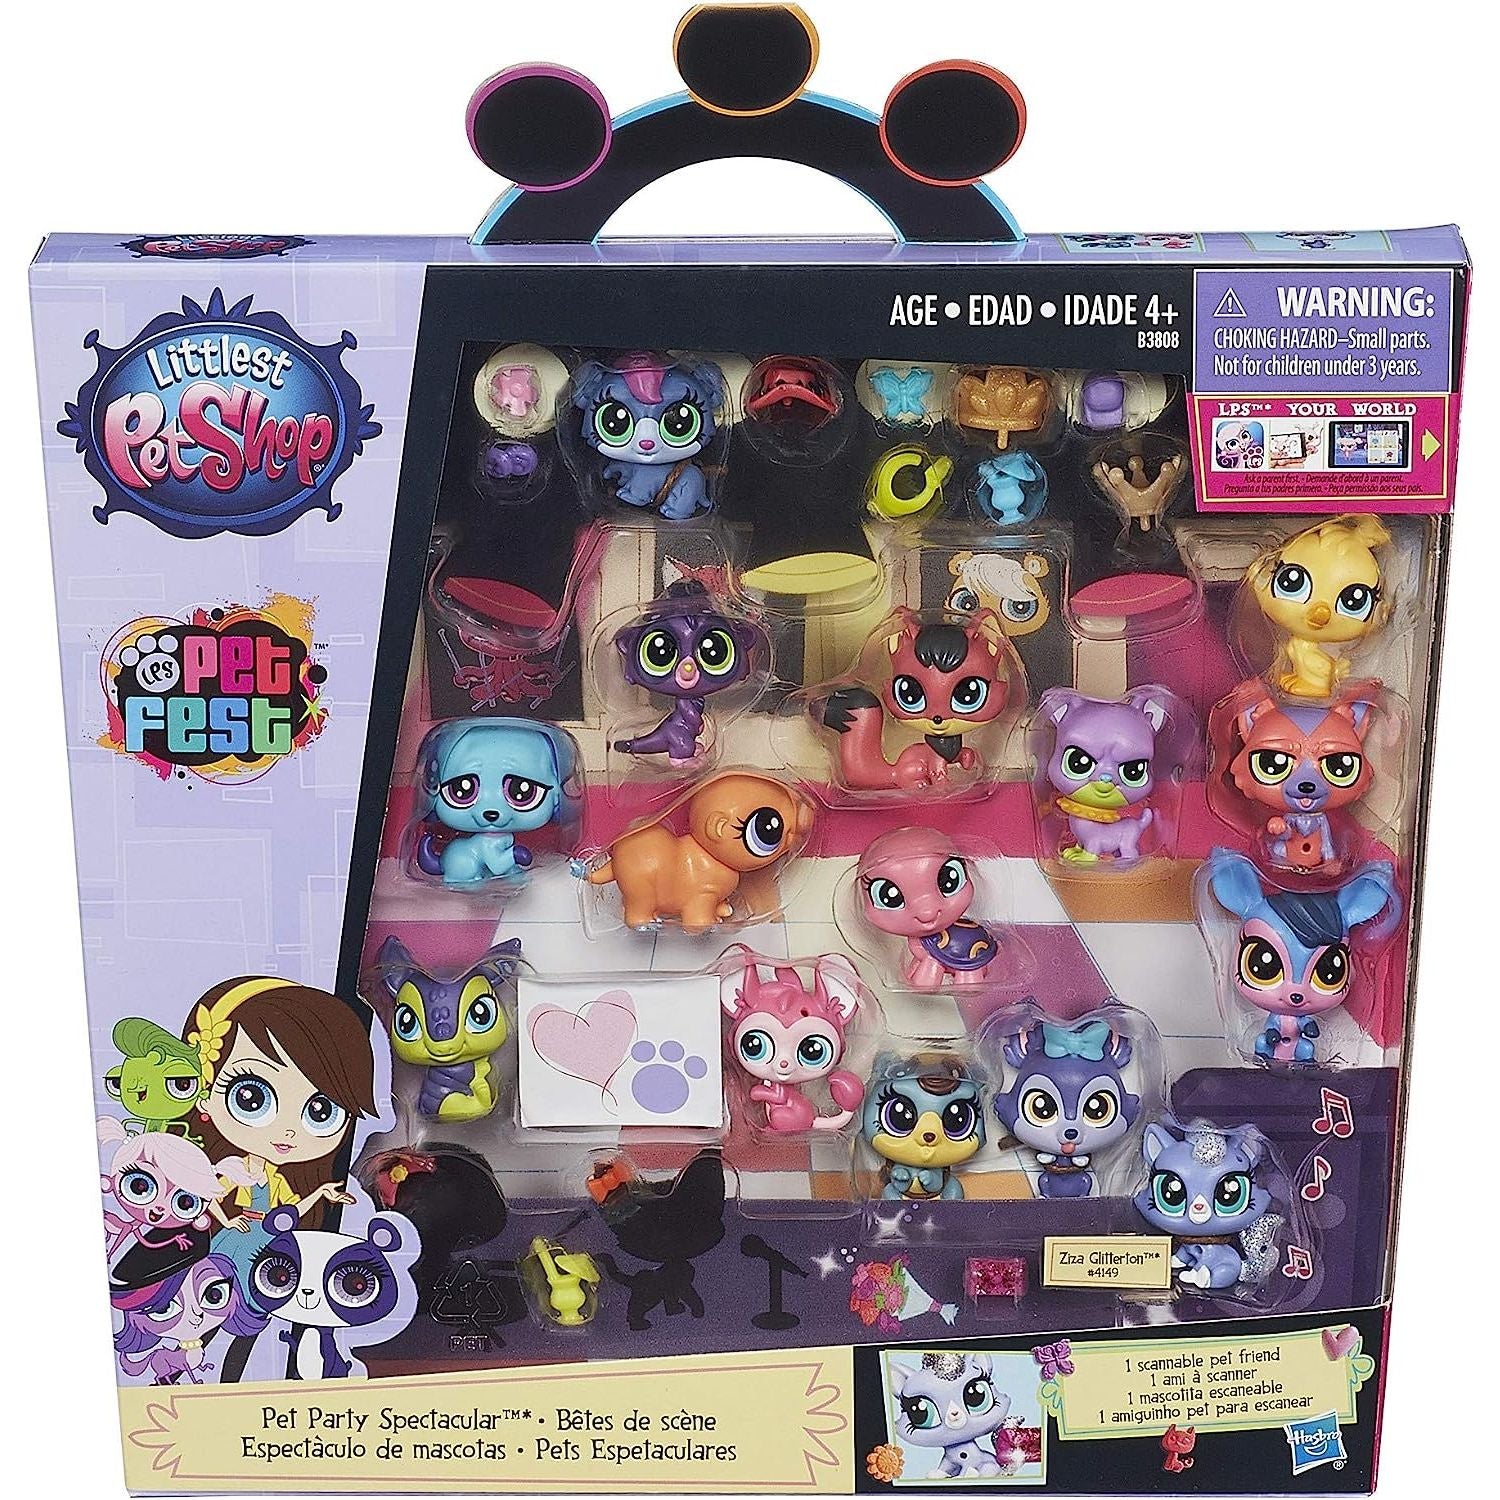 Littlest Pet Shop Party Spectacular Collector Pack Toy, Includes 15 Pets, Ages 4 and Up